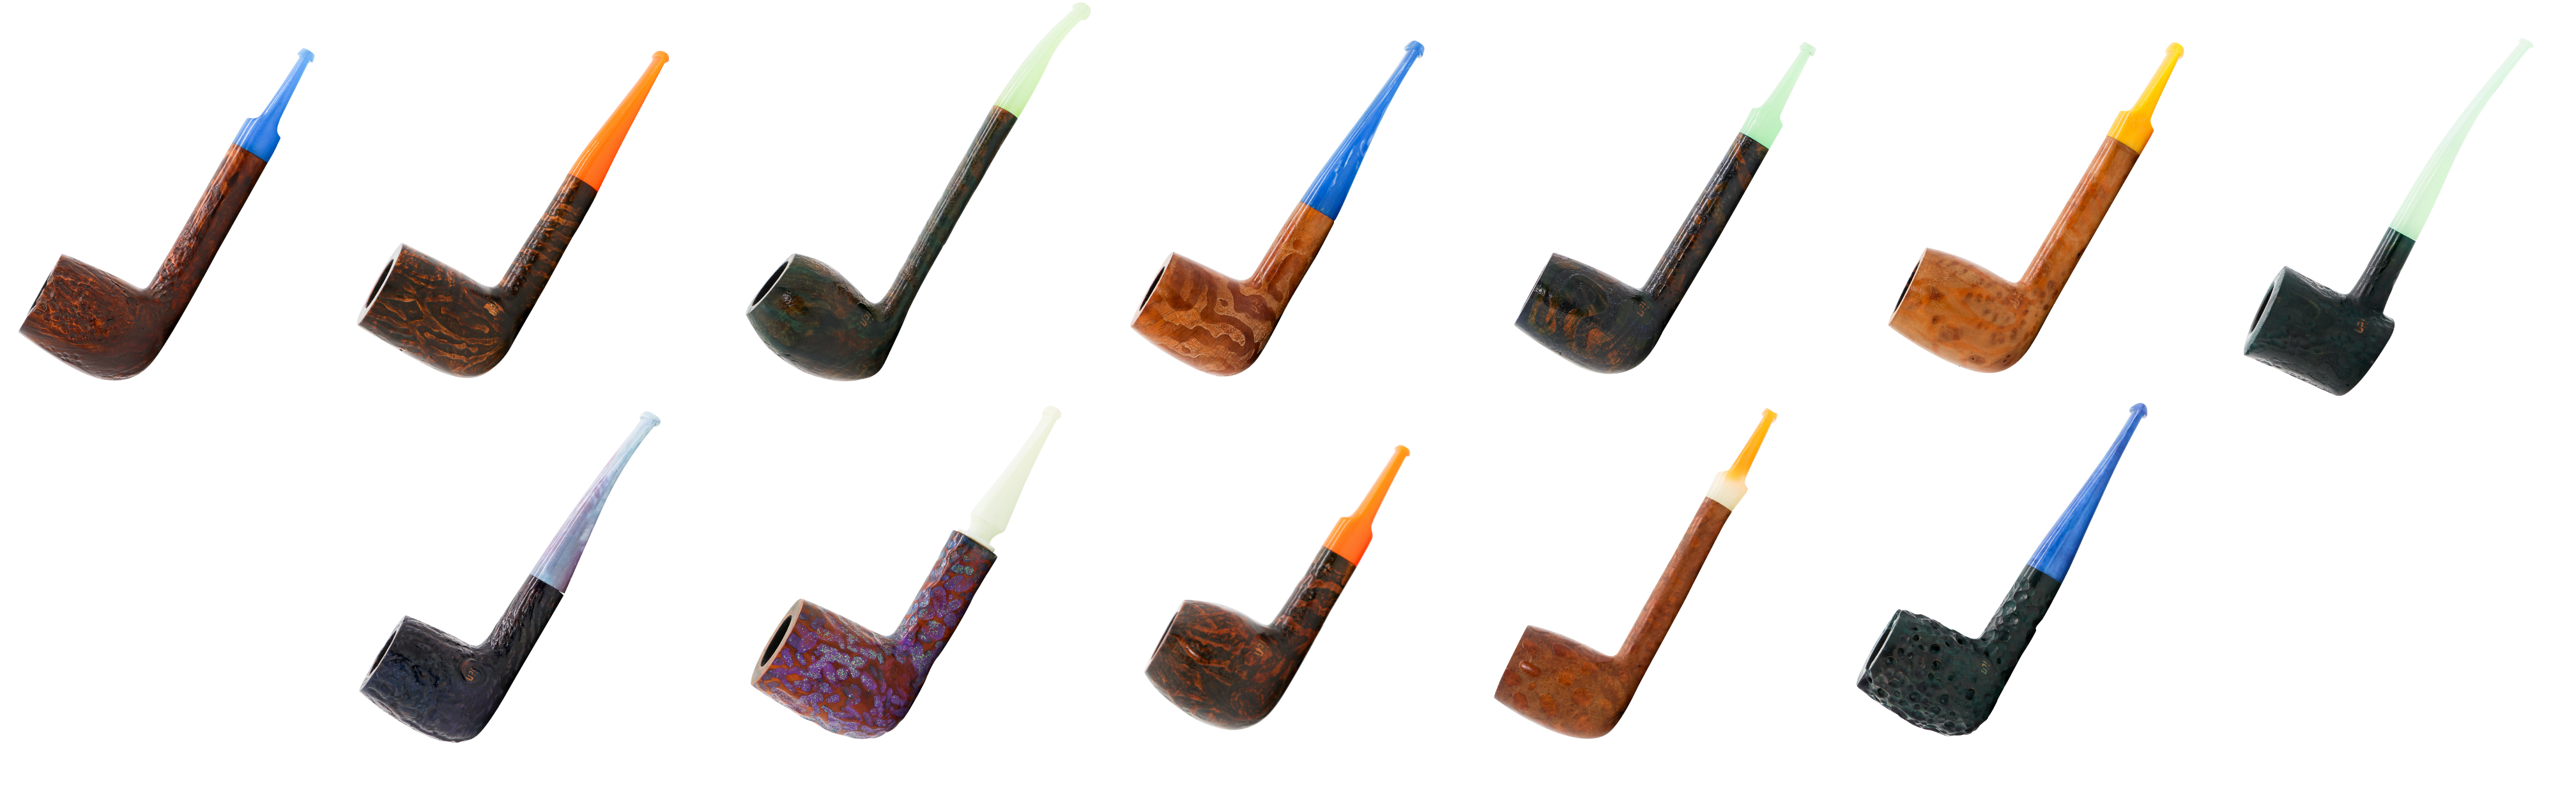 UNCANNY?! Material tobacco pipes